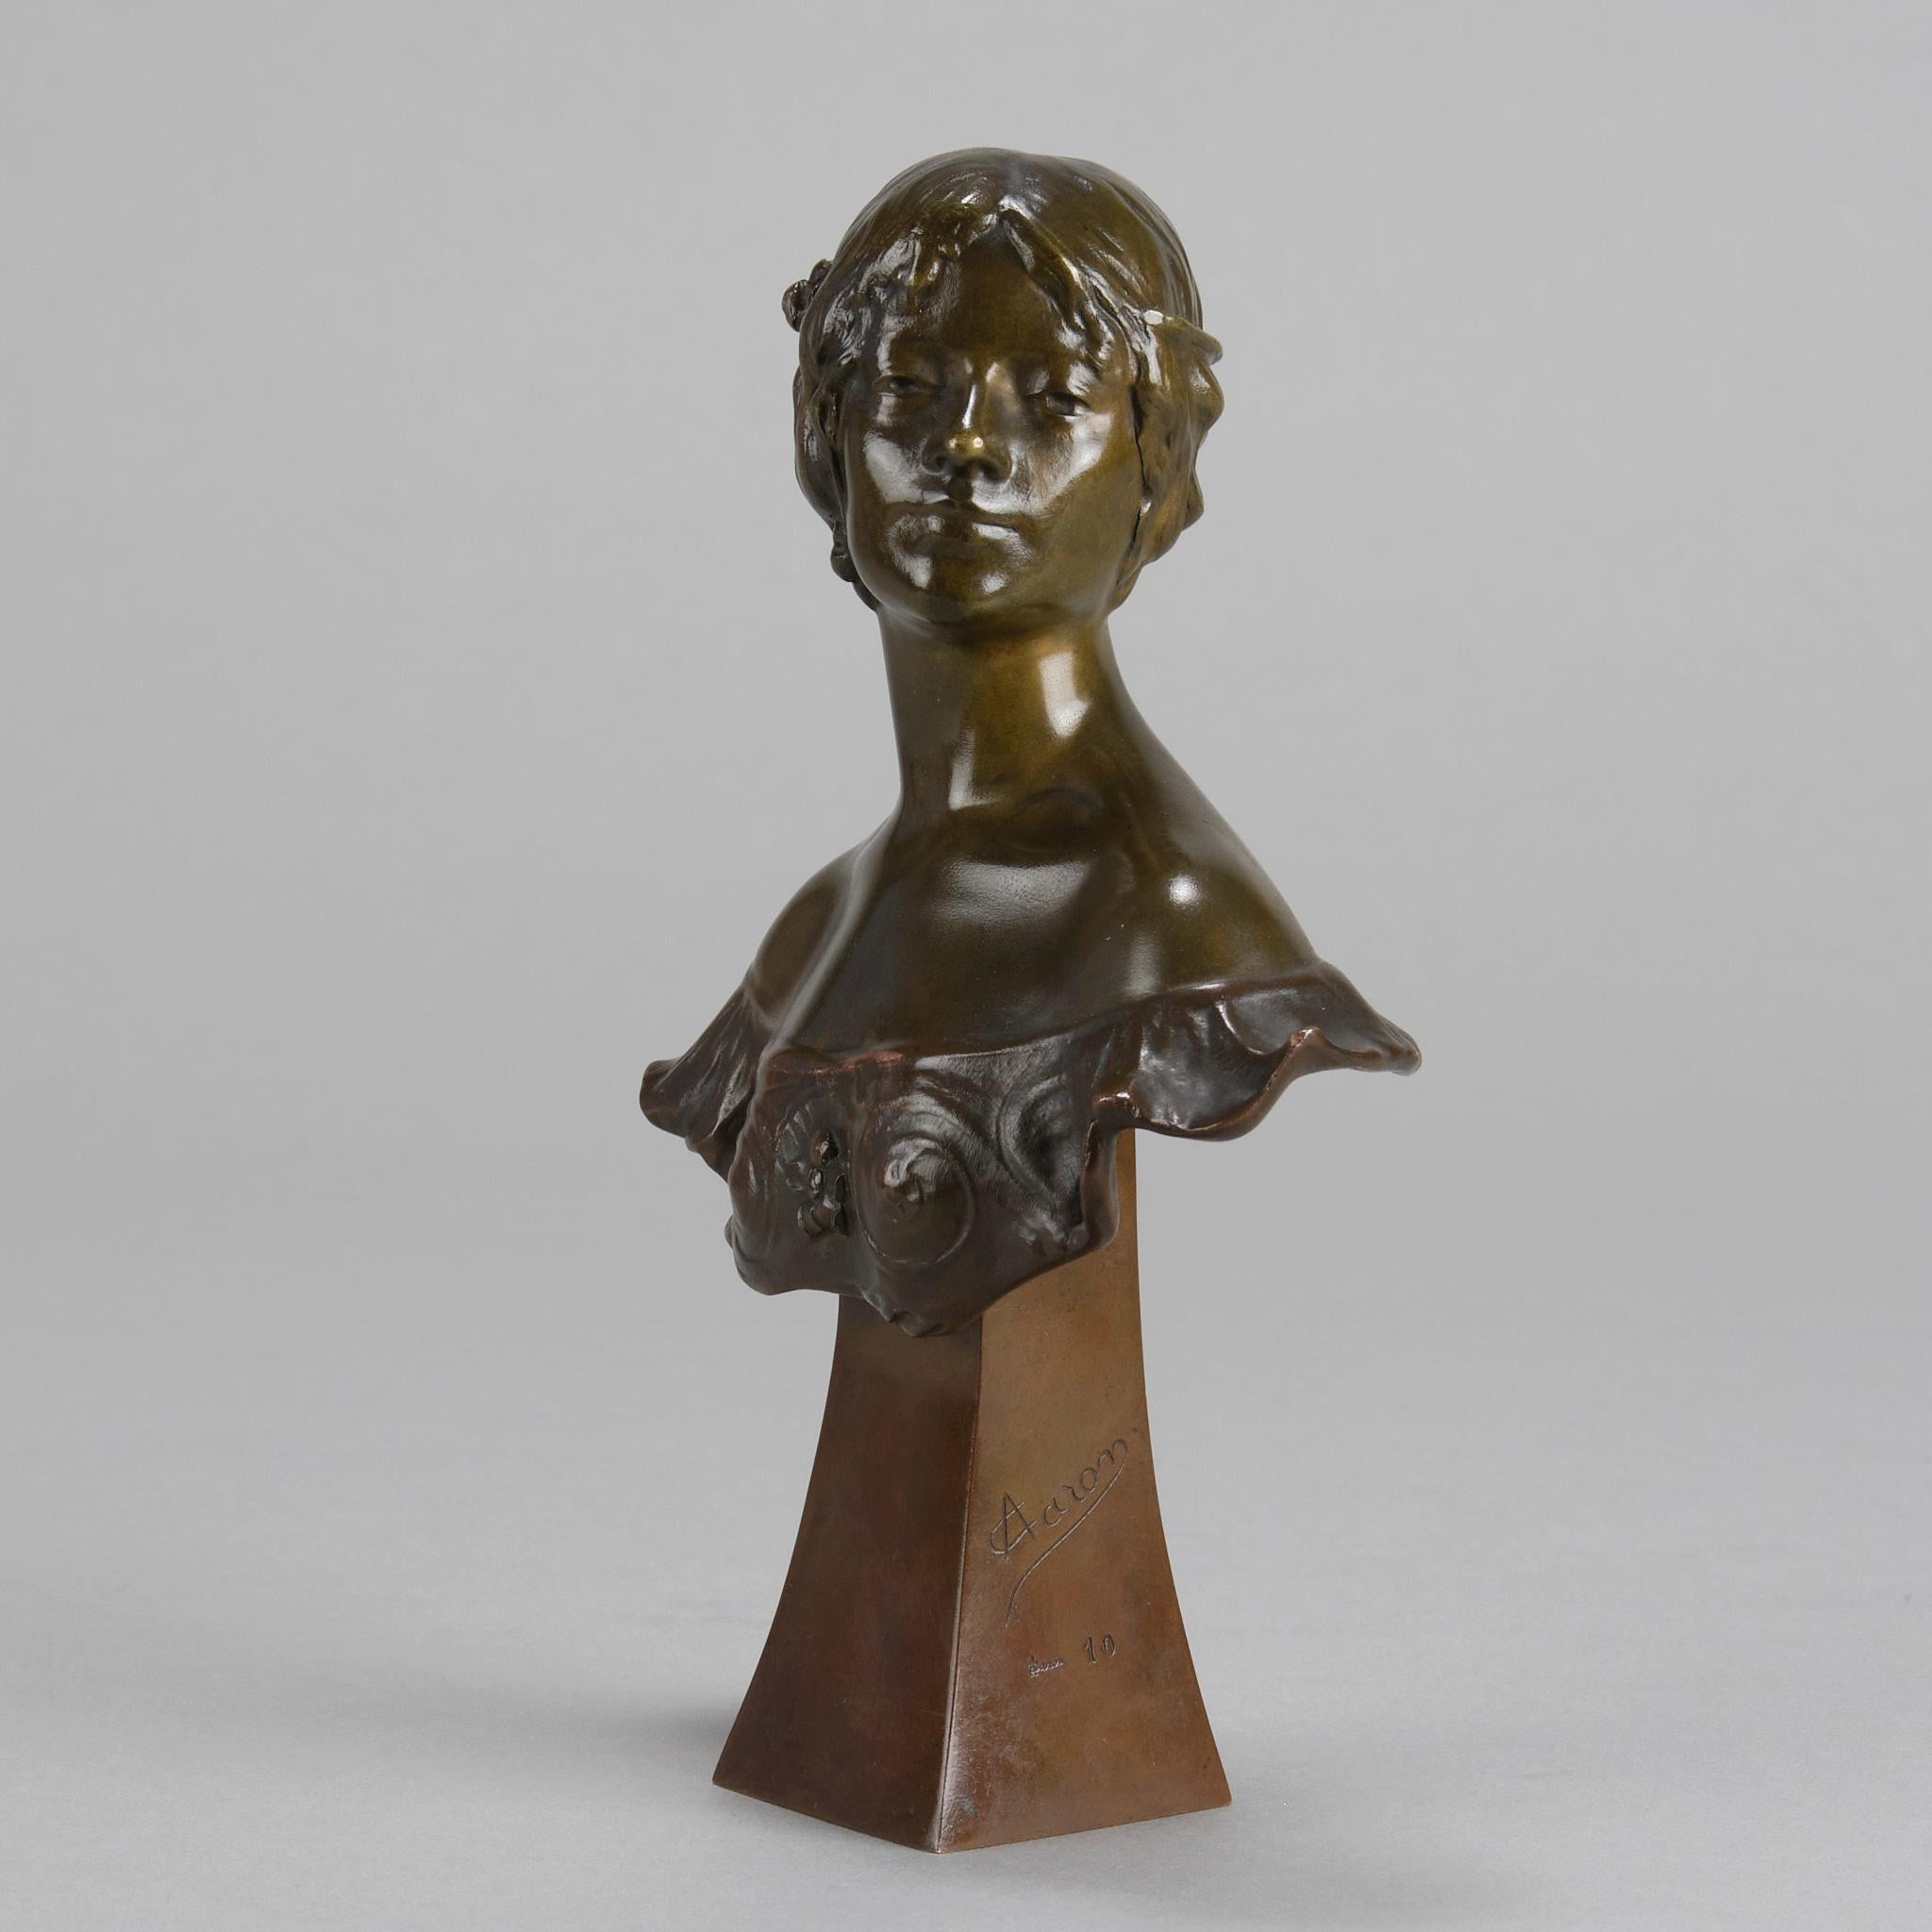 Early 20th Century Early 20th Centrury French Bronze Entitled Art Nouveau Bust by Alexandre Caron For Sale